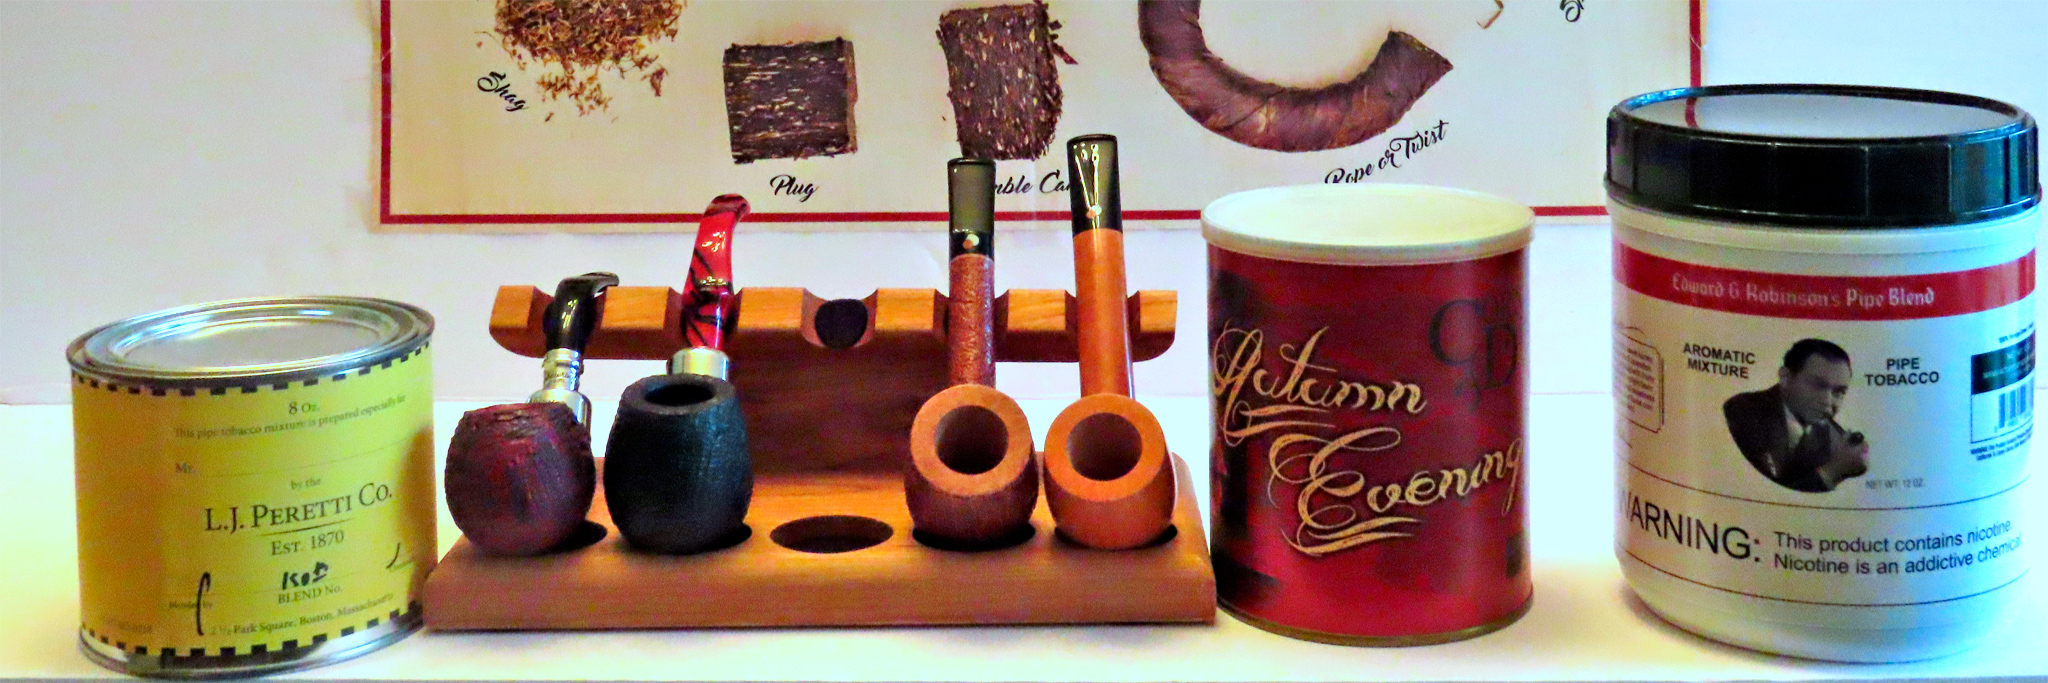 Some favored tobacco blends and new pipes from left: L.J. Peretti 150th Anniversary Virginia Flake blend; new pipes L-R: Peterson XL02 Rua Fishtail (red fox) in a crimson-and-black contrast-stained sandblast and the Peterson Halloween 2021 System Pipe B42 P-Lip with its acrylic red and black stem and black sandblast; two Claudio Cavicchis, L-R, Lovat brown sandblast and CCC Canadian; two tobacco cans, Cornell & Diehl’s Autumn Evening and Sutliff Tobacco Co.’s Edward G. Robinson’s Pipe Blend. Photo by Fred Brown